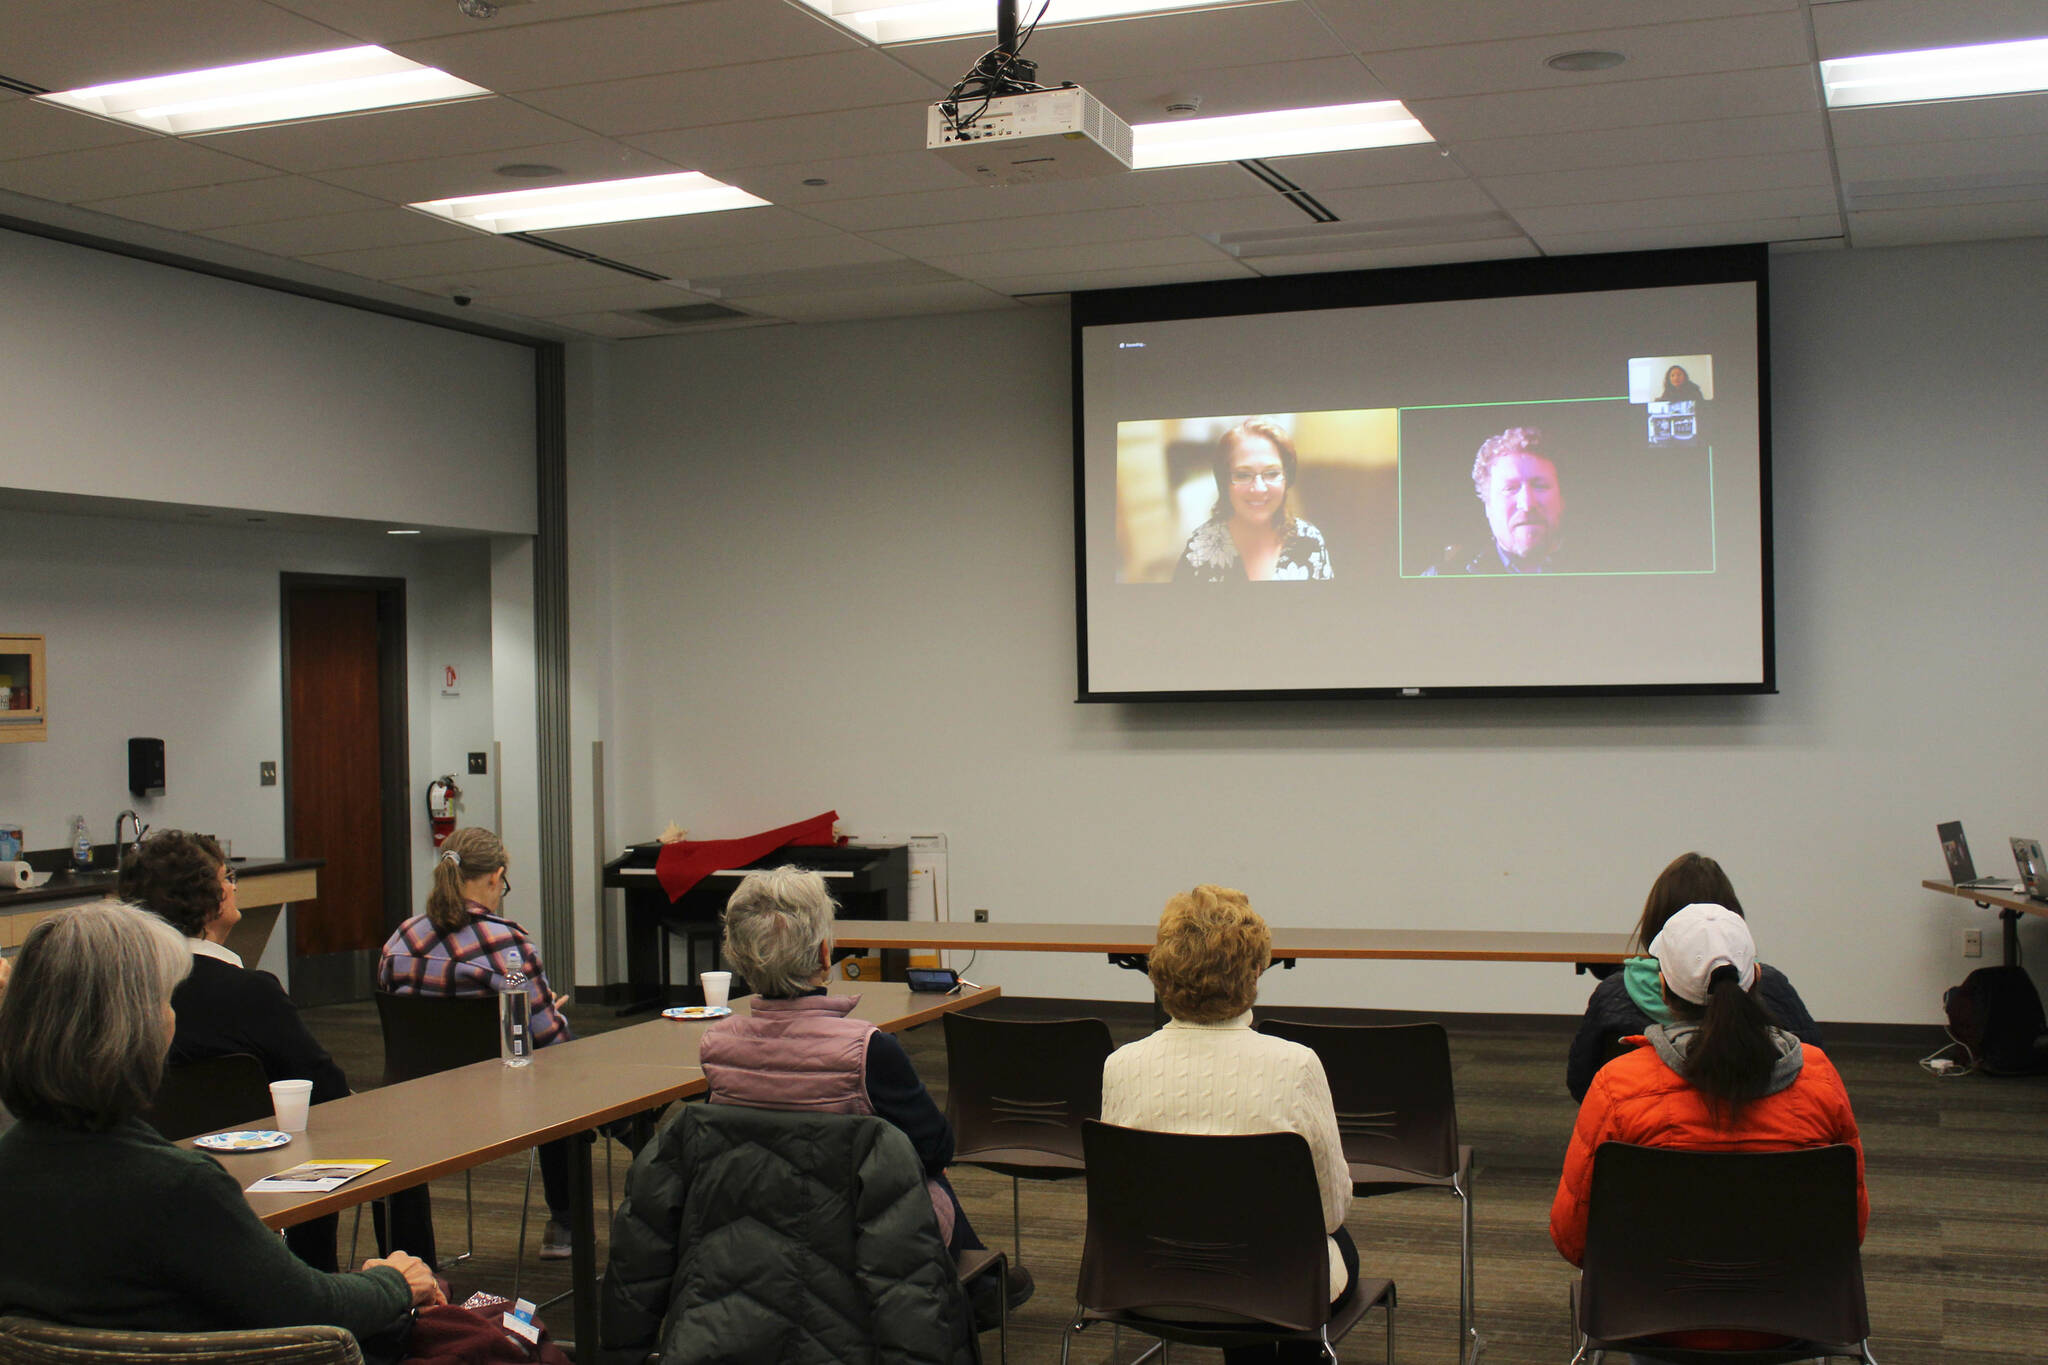 Candidates for Alaska State House District 6 Ginger Bryant, on screen, left, and Louie Flora, on screen, right, participate remotely in a forum held at the Soldotna Public Library on Monday, Oct. 24, 2022 in Soldotna, Alaska. (Ashlyn O’Hara/Peninsula Clarion)